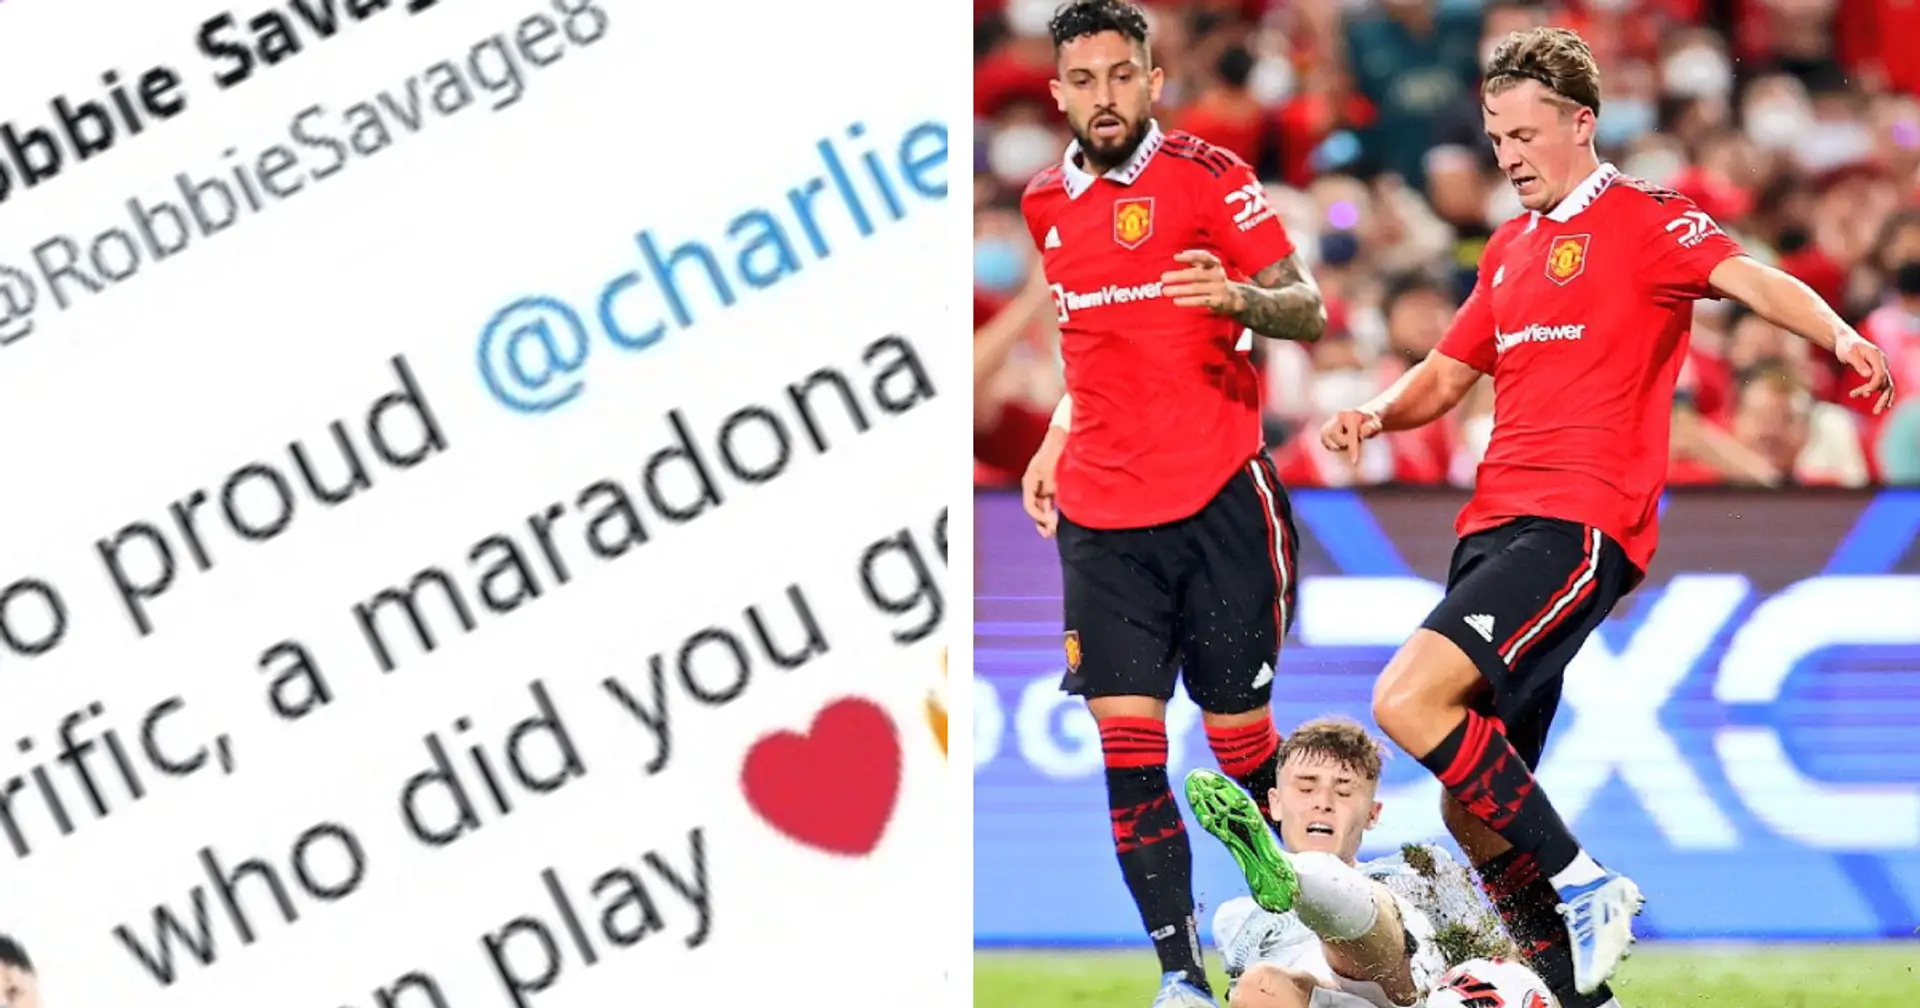 'A Maradona turn on edge of your own box': Robbie Savage reacts to son Charlie's display against Liverpool